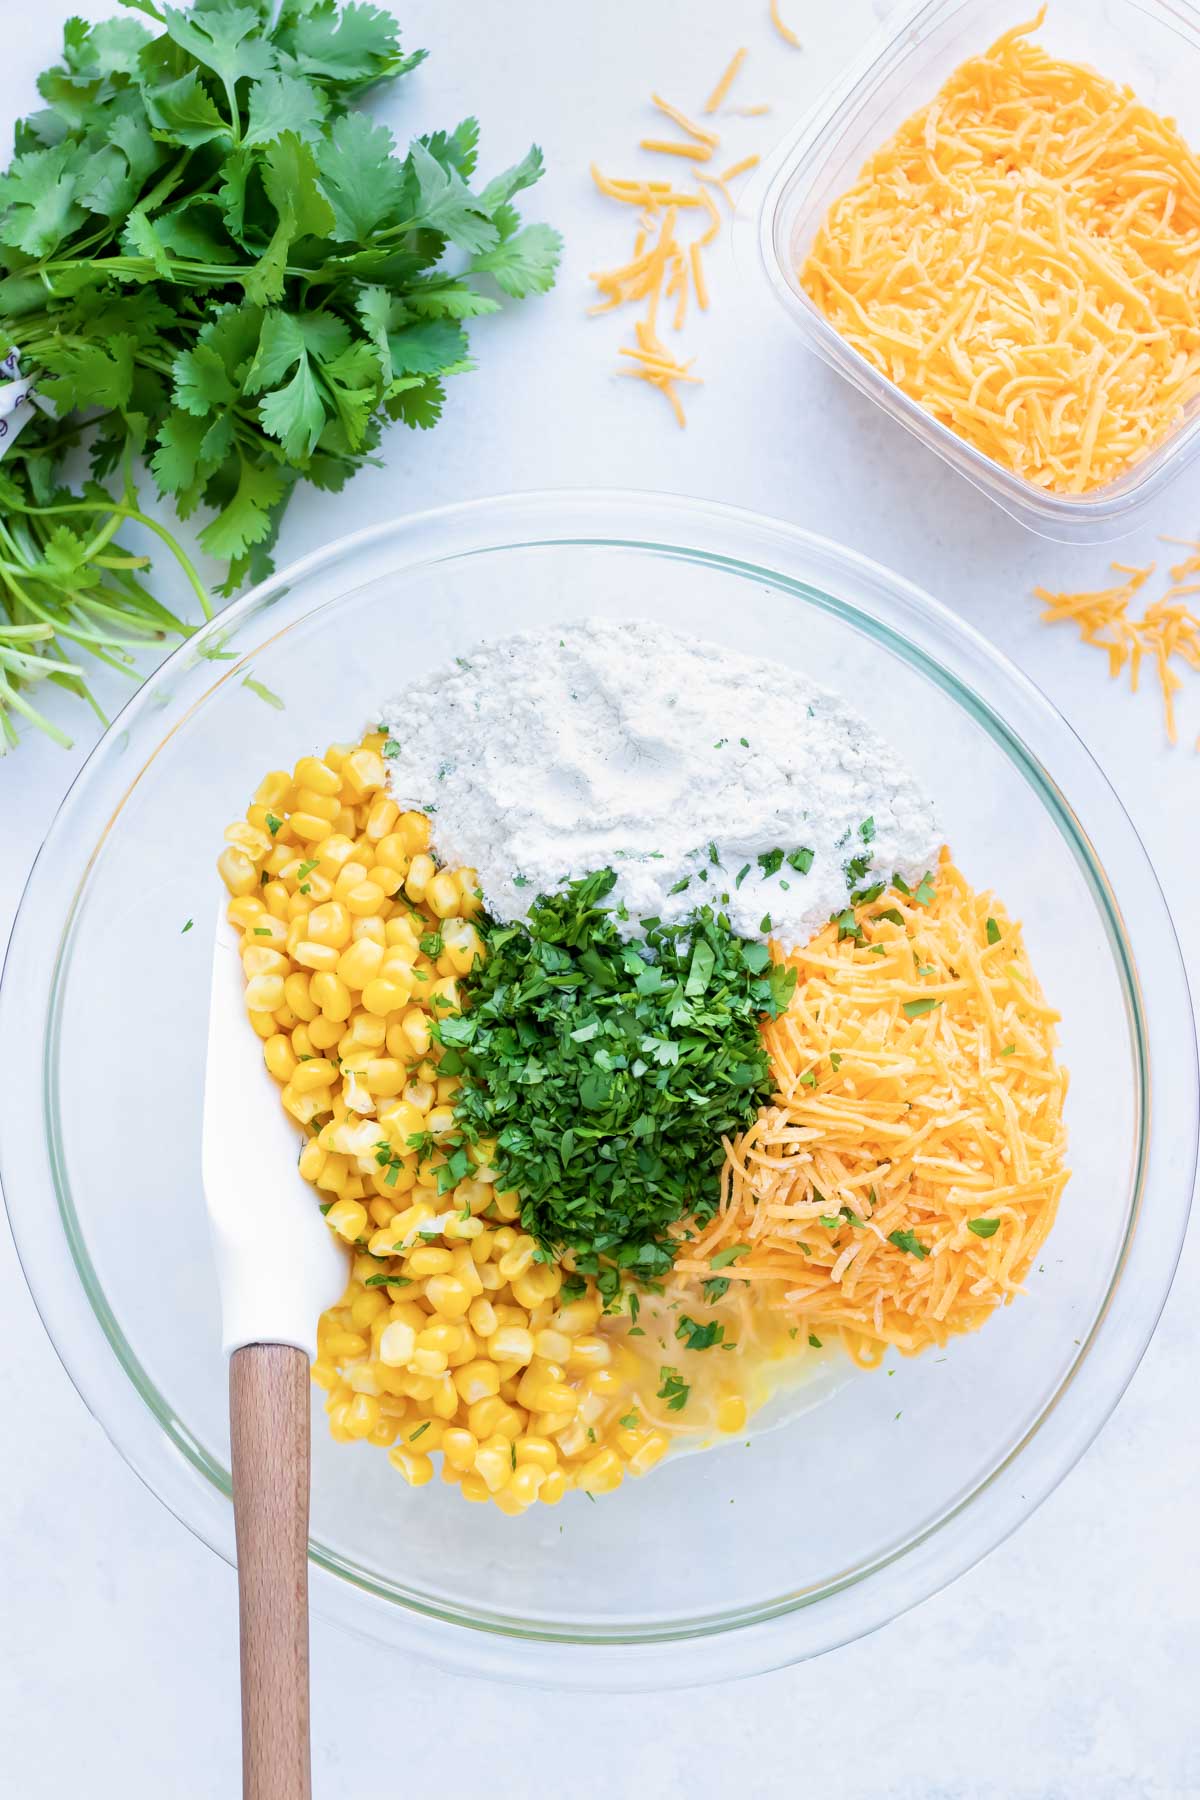 A clear glass mixing bowl with corn kernels, flour, shredded cheddar cheese, and cilantro.